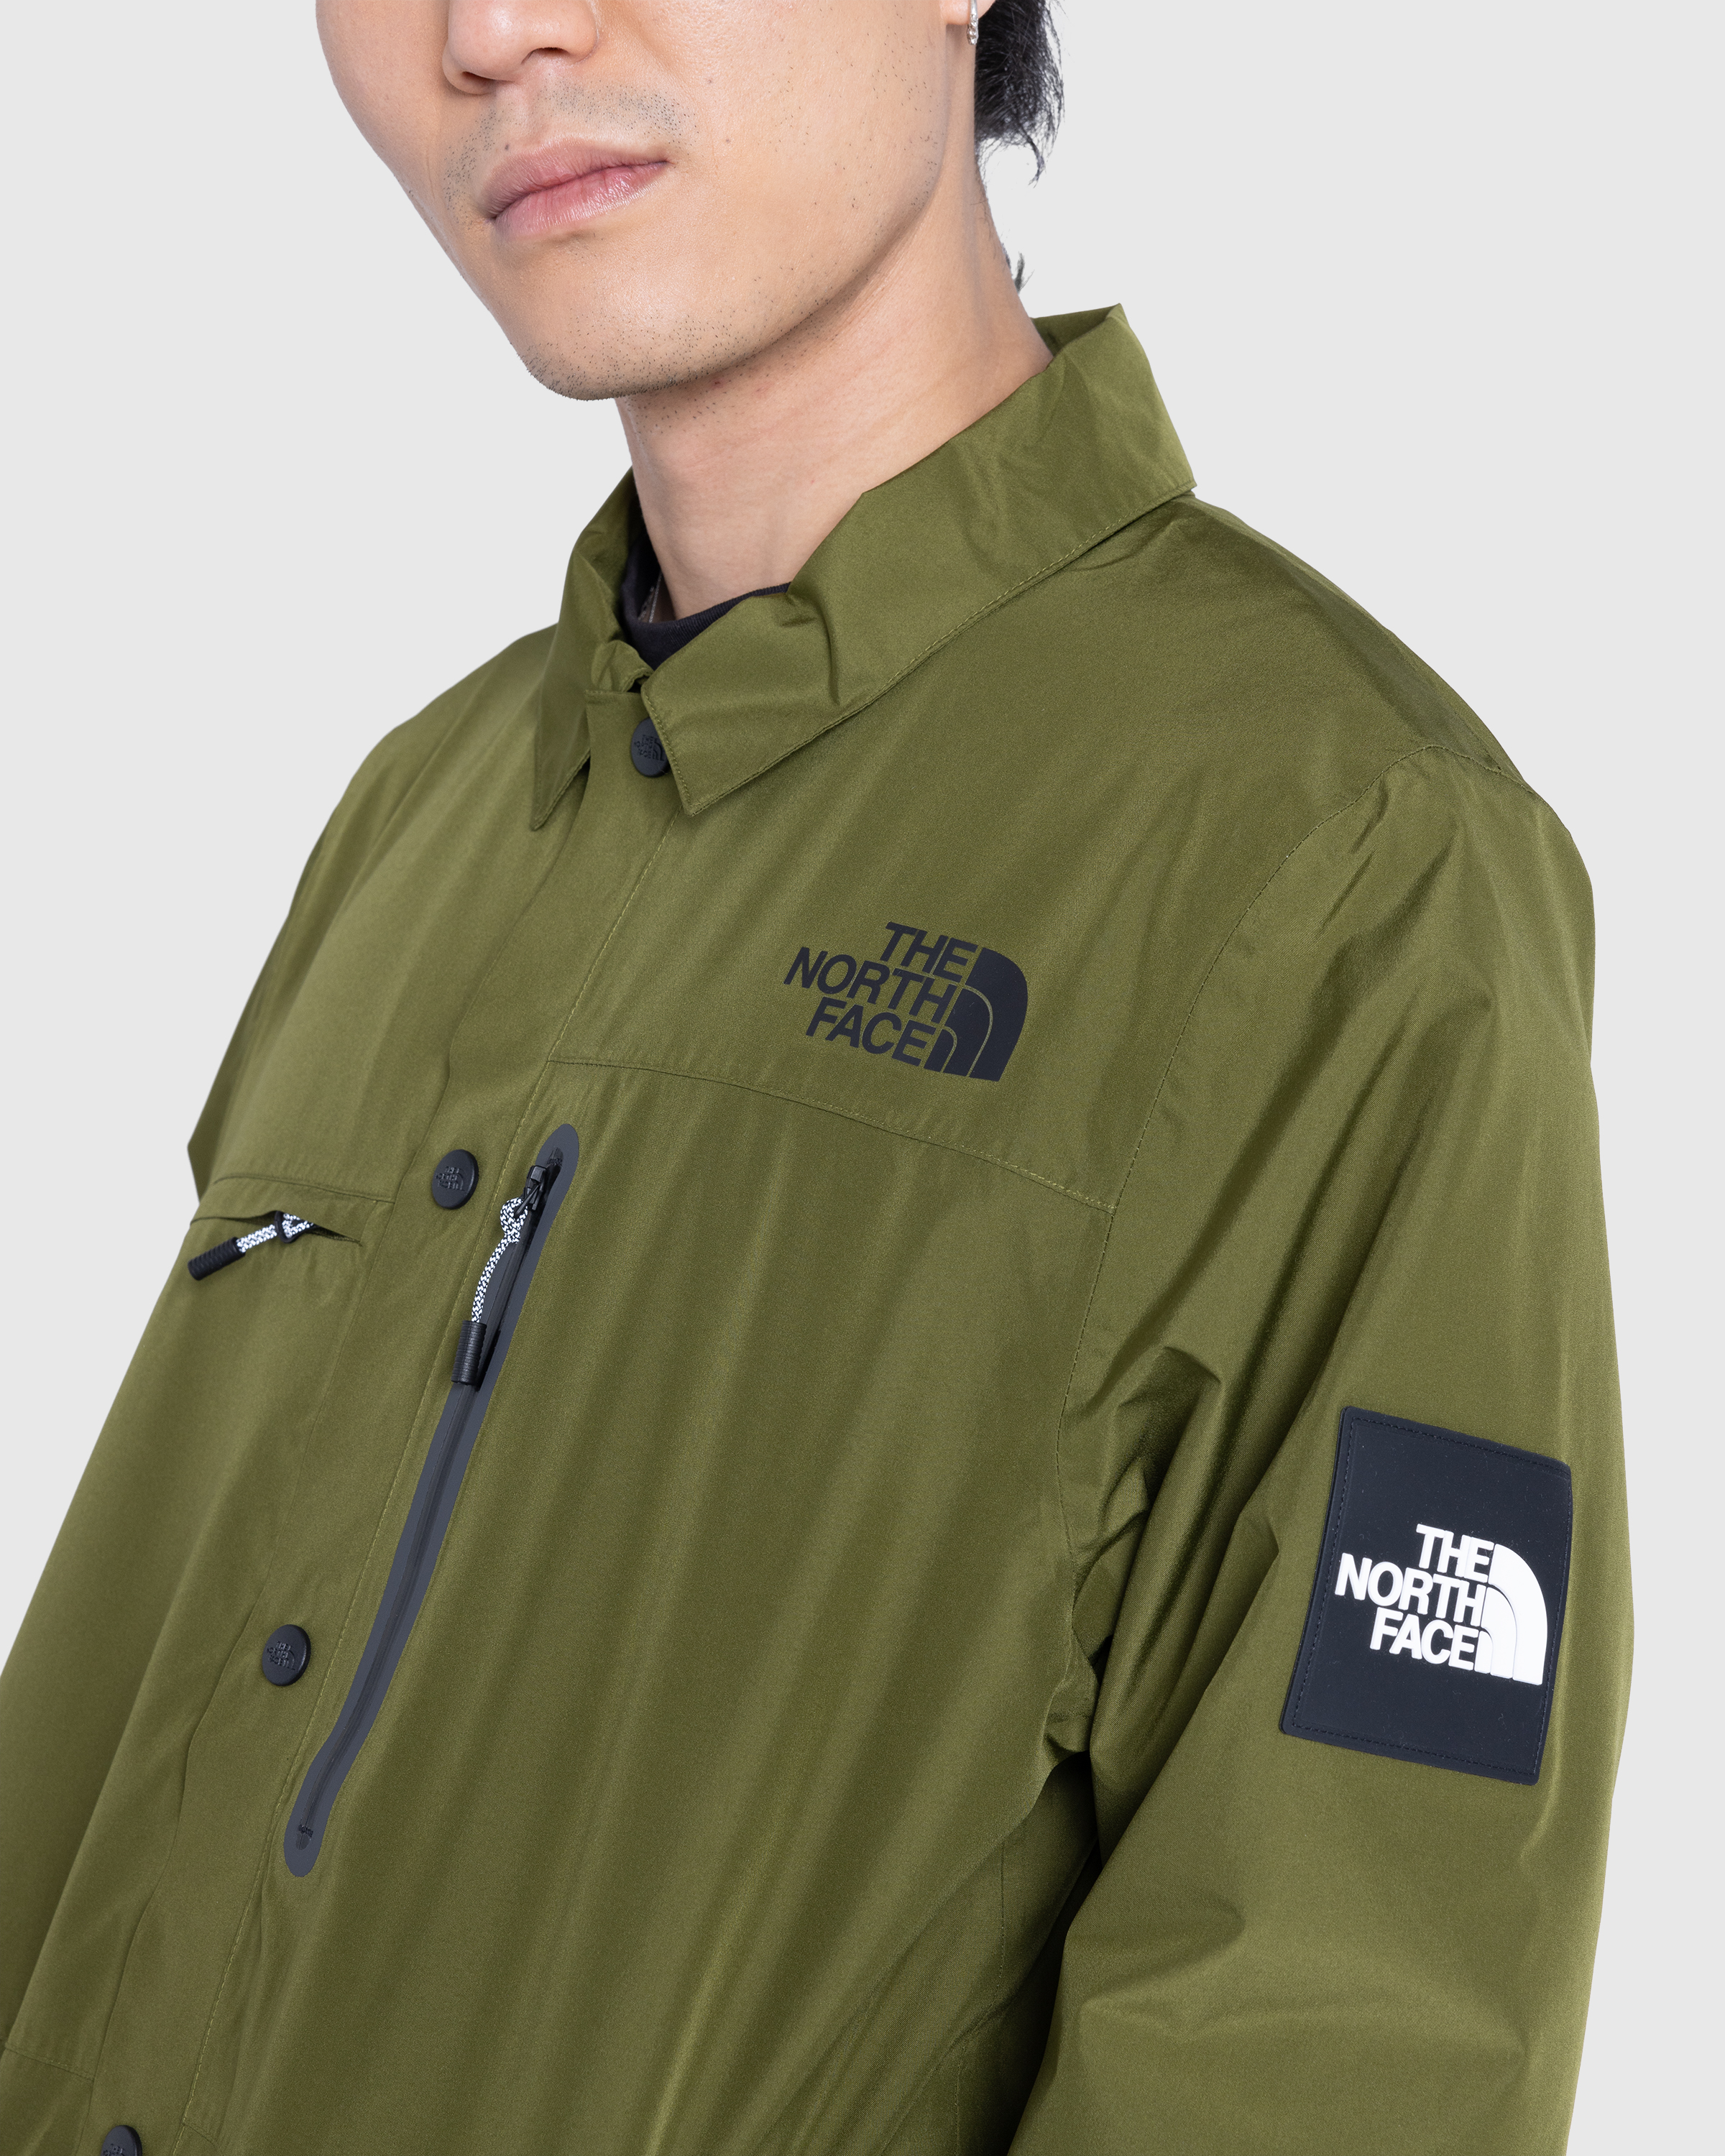 The North Face – Amos Tech Overshirt Forest Olive - Overshirt - Green - Image 5